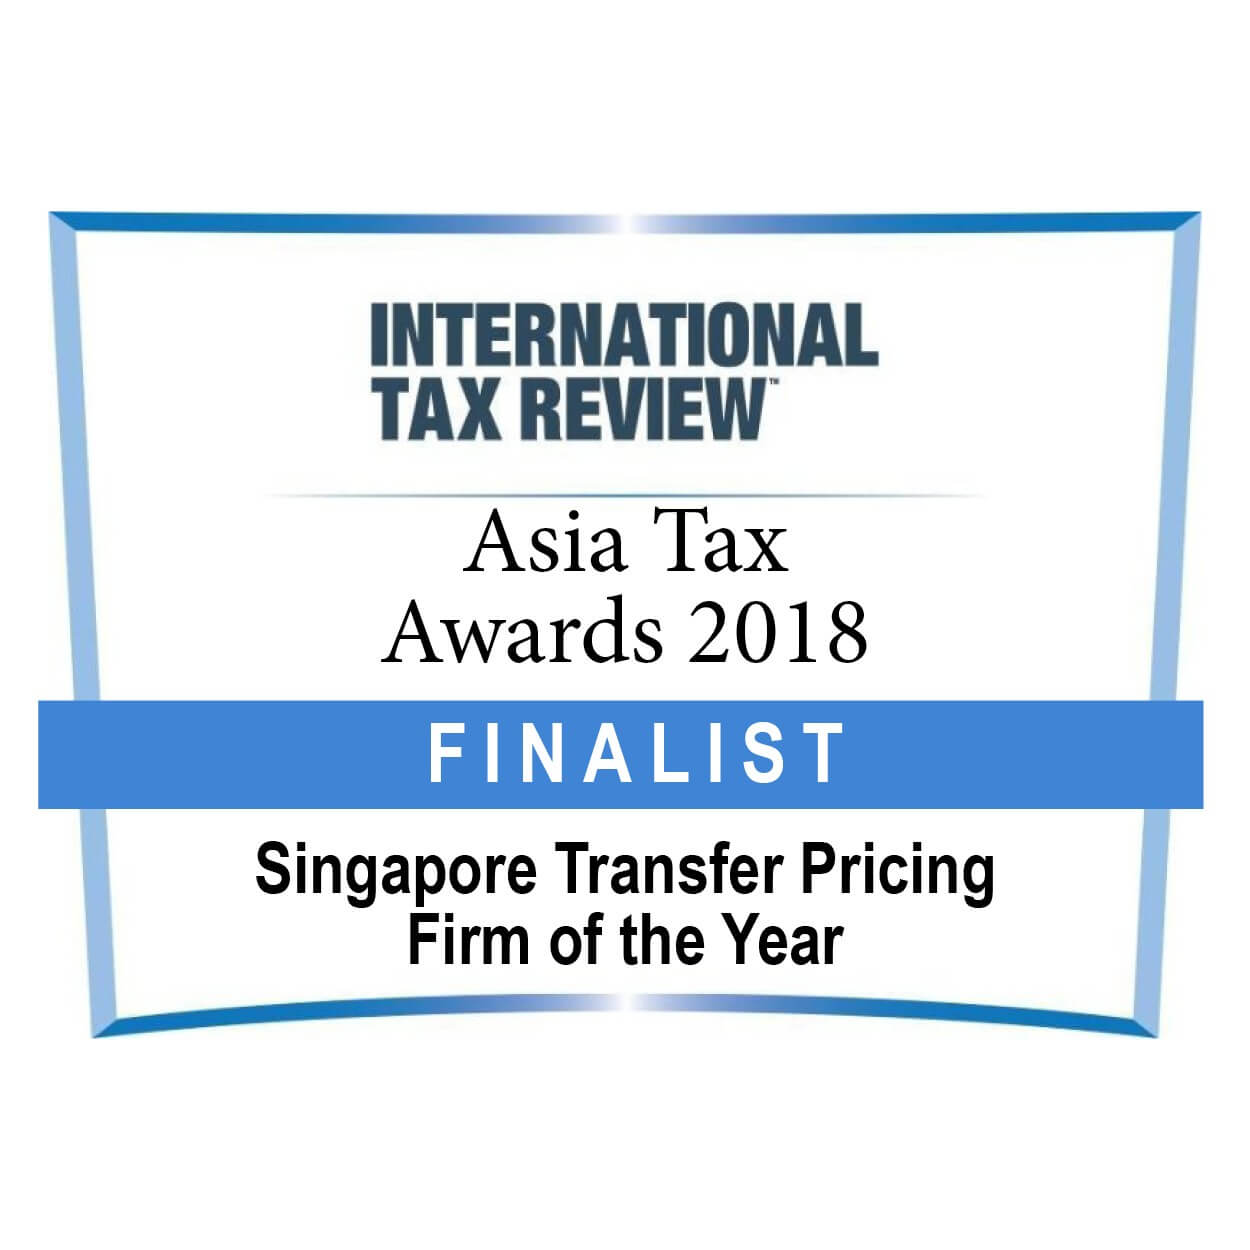 Singapore TP Firm - 2018